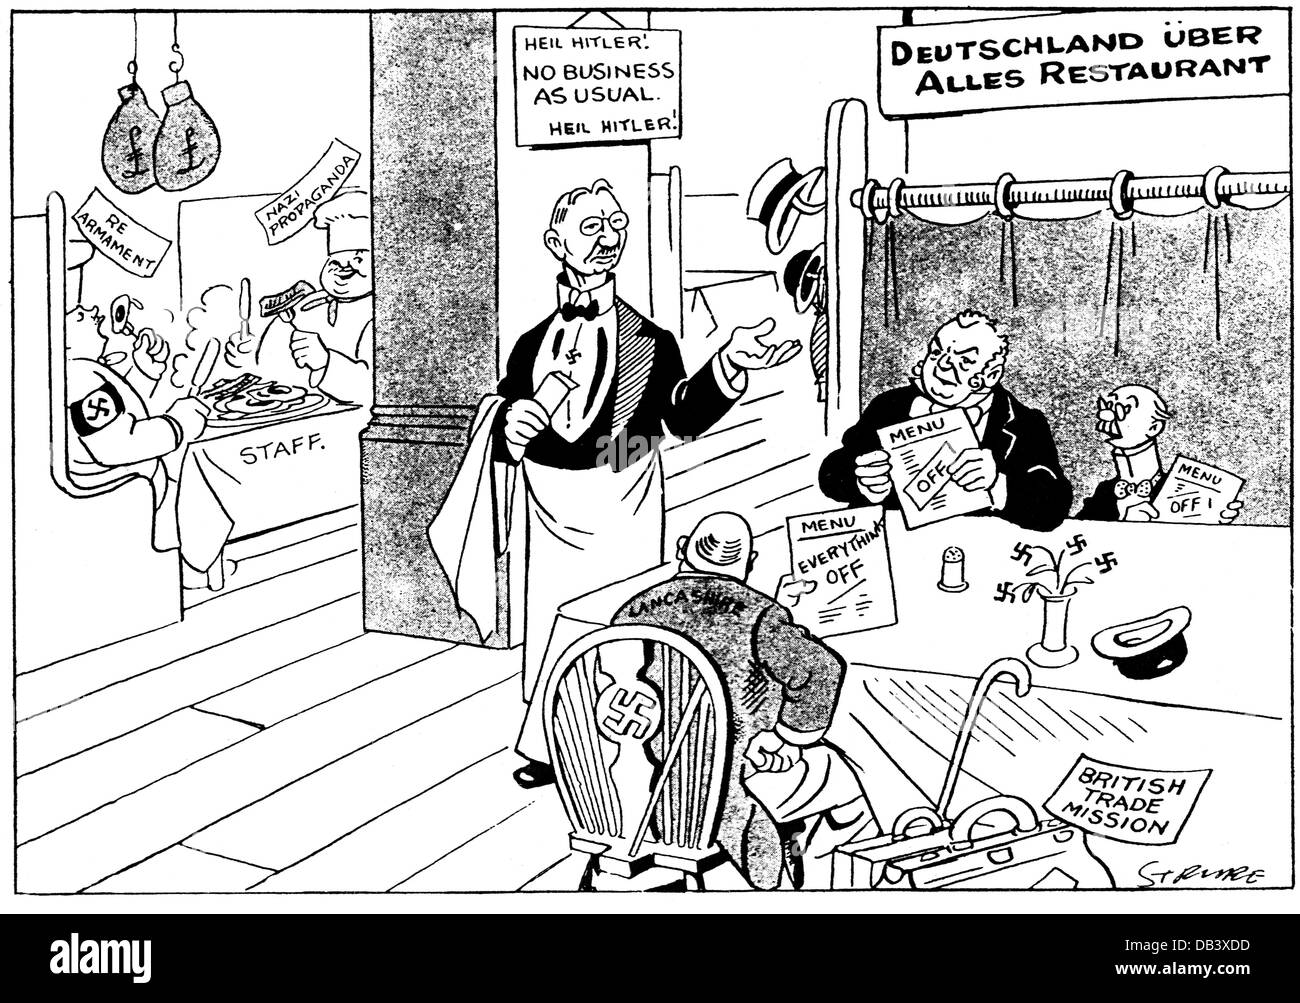 Schacht, Hjalmar, 22.1.1877 - 13.6.1970, German politician, caricature, serving as waiter the British commercial mission, out of: 'Daily Mail', London, 17.9.1933, Stock Photo